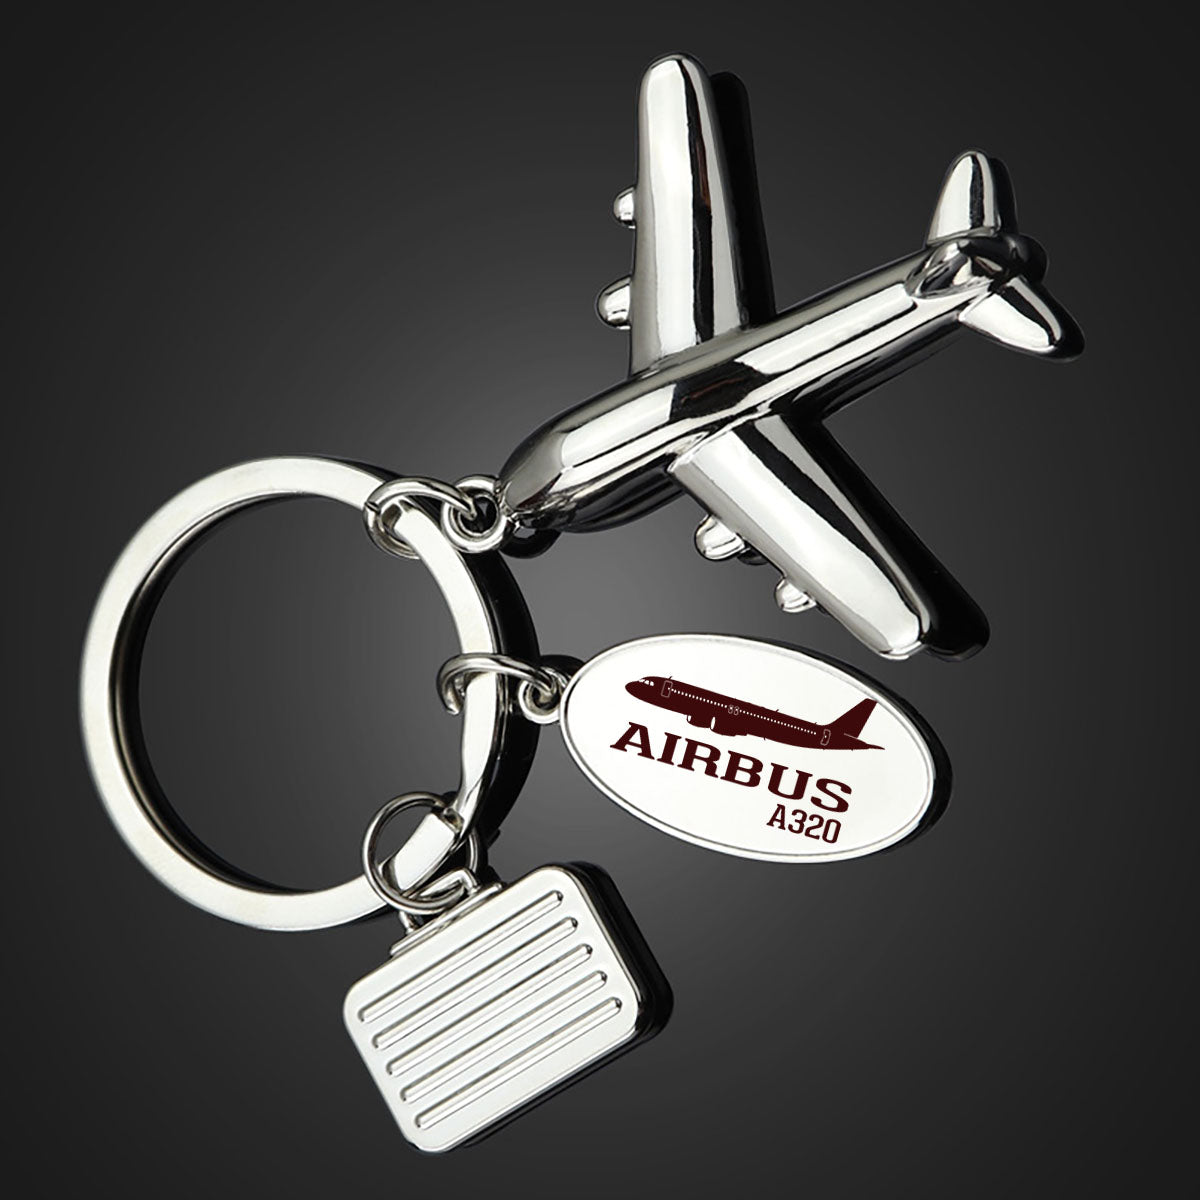 Airbus A320 Printed Designed Suitcase Airplane Key Chains